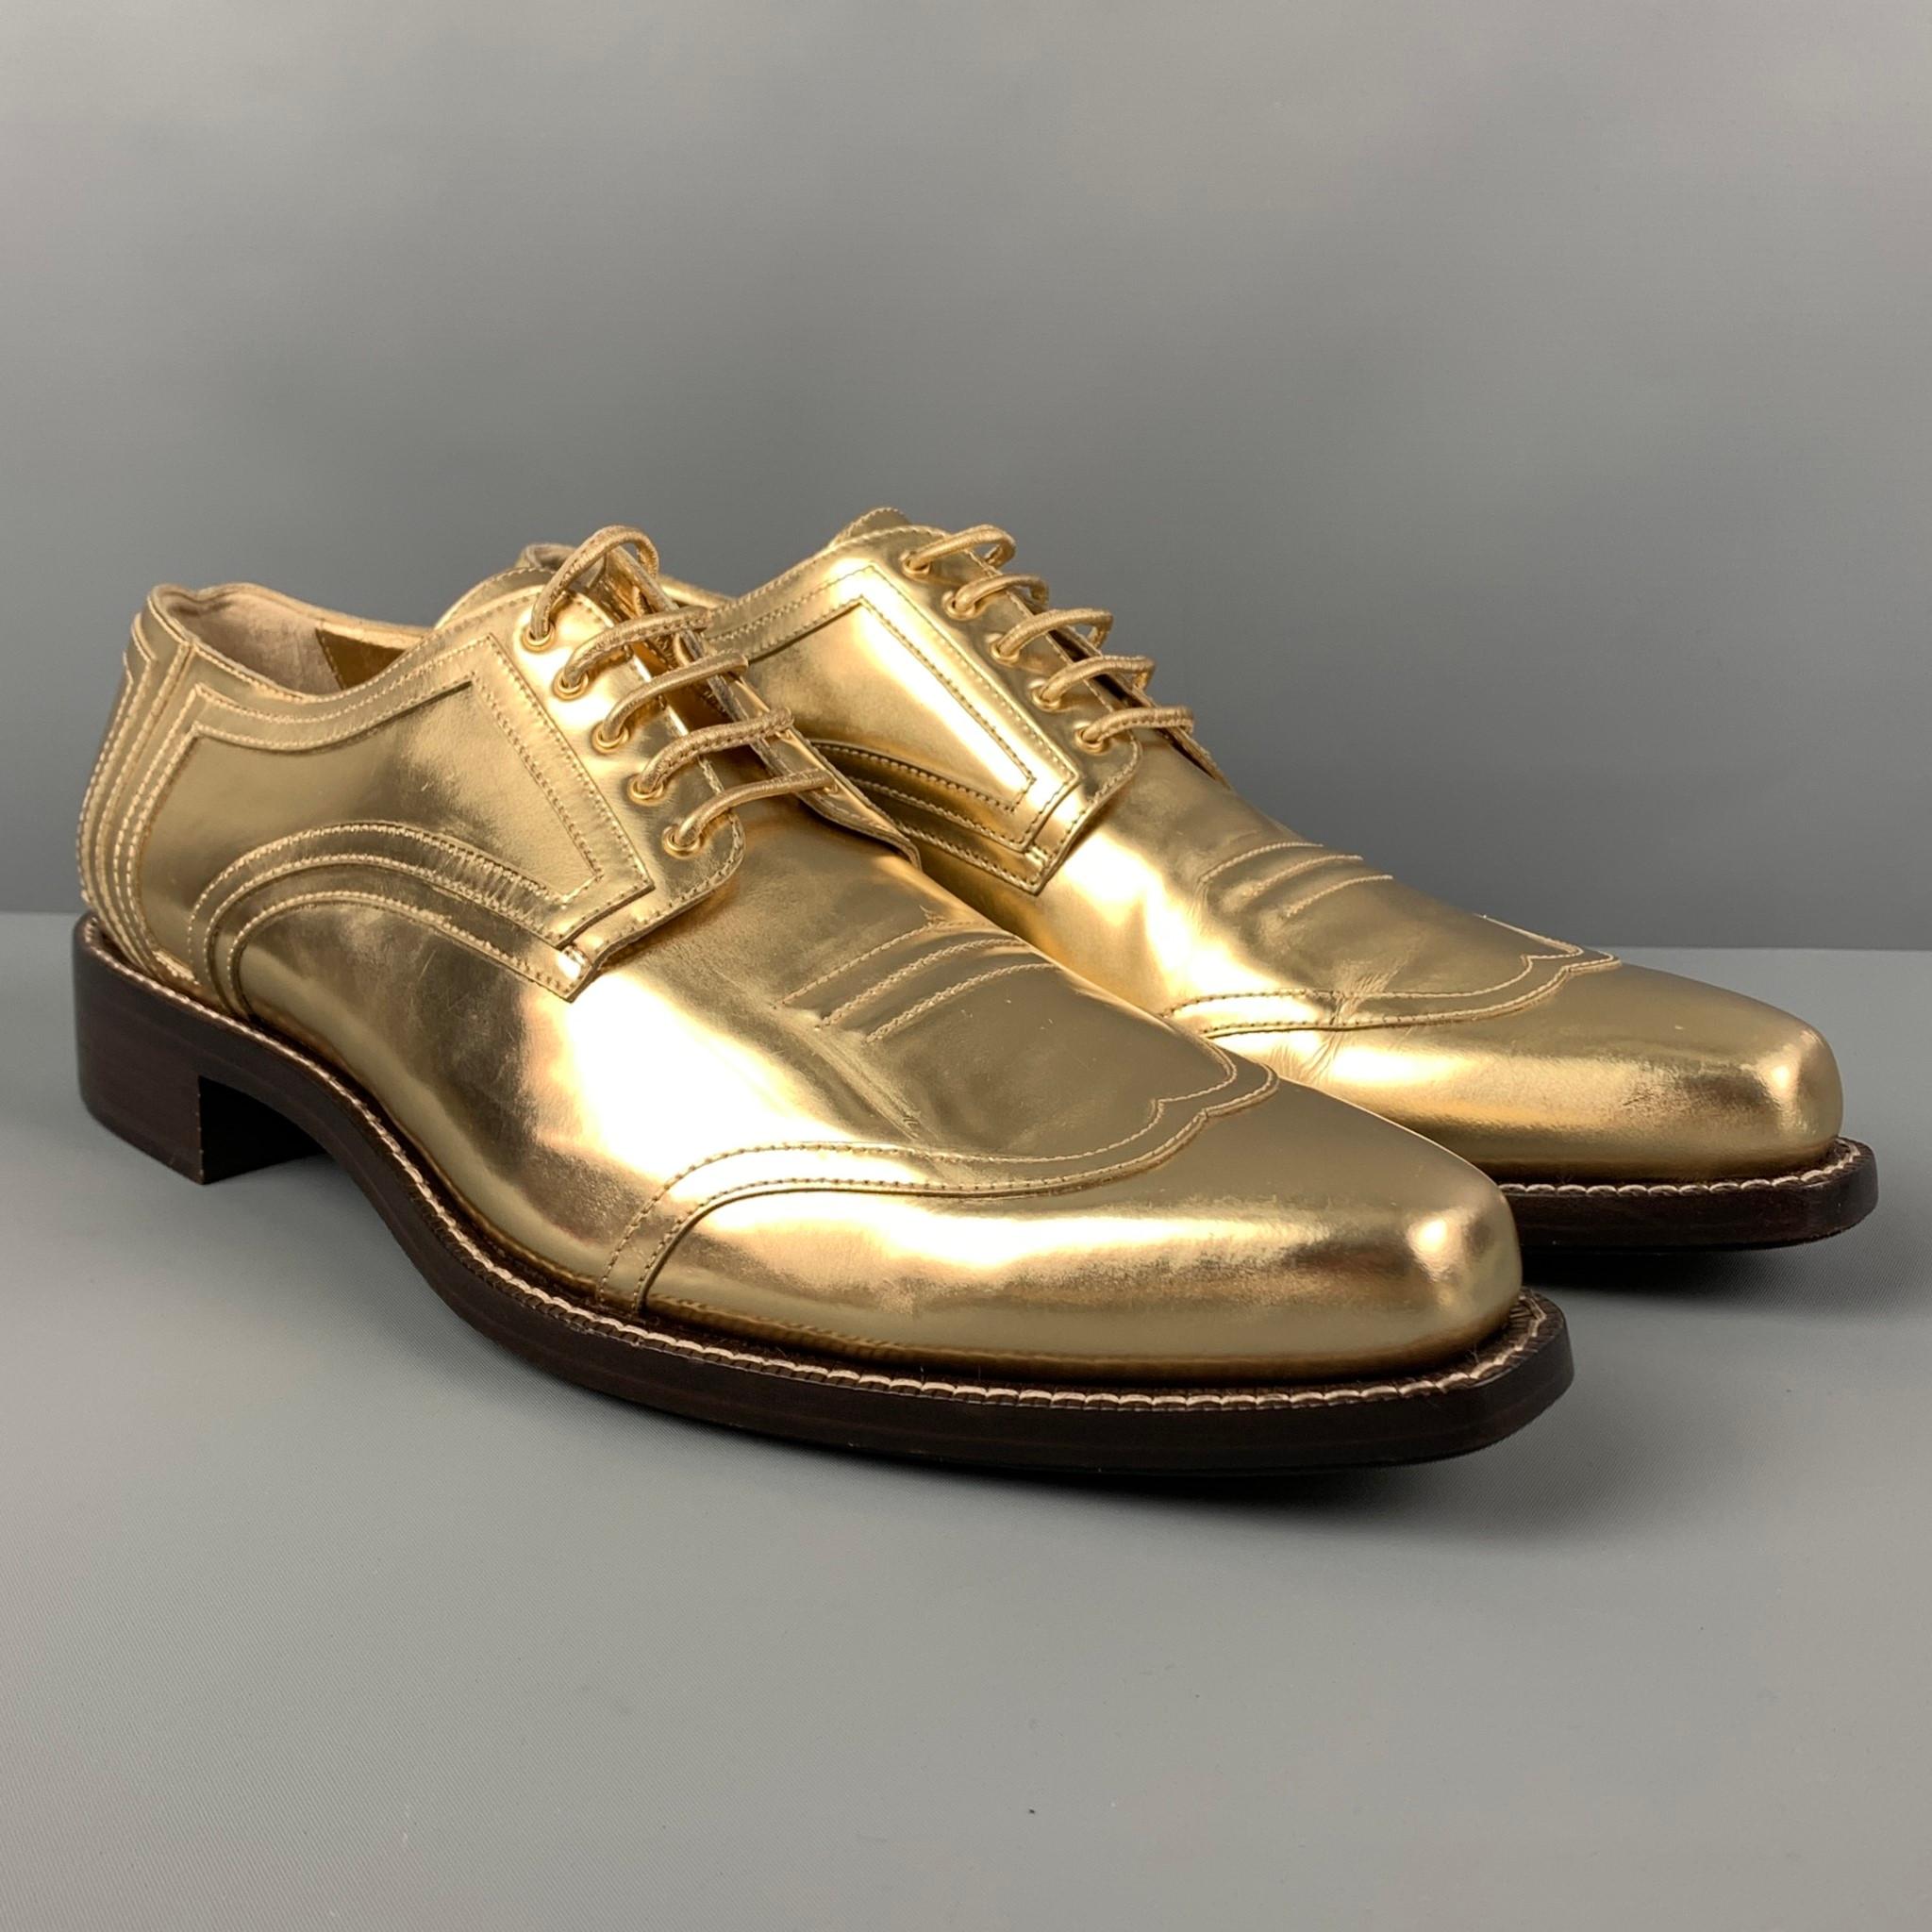 CALVIN KLEIN COLLECTION shoes comes in a gold metallic leather featuring a square toe, top stitching, and a lace up closure. Made in Italy. 

Very Good Pre-Owned Condition.
Marked: 12

Outsole: 13.25 in. x 4.5 in. 